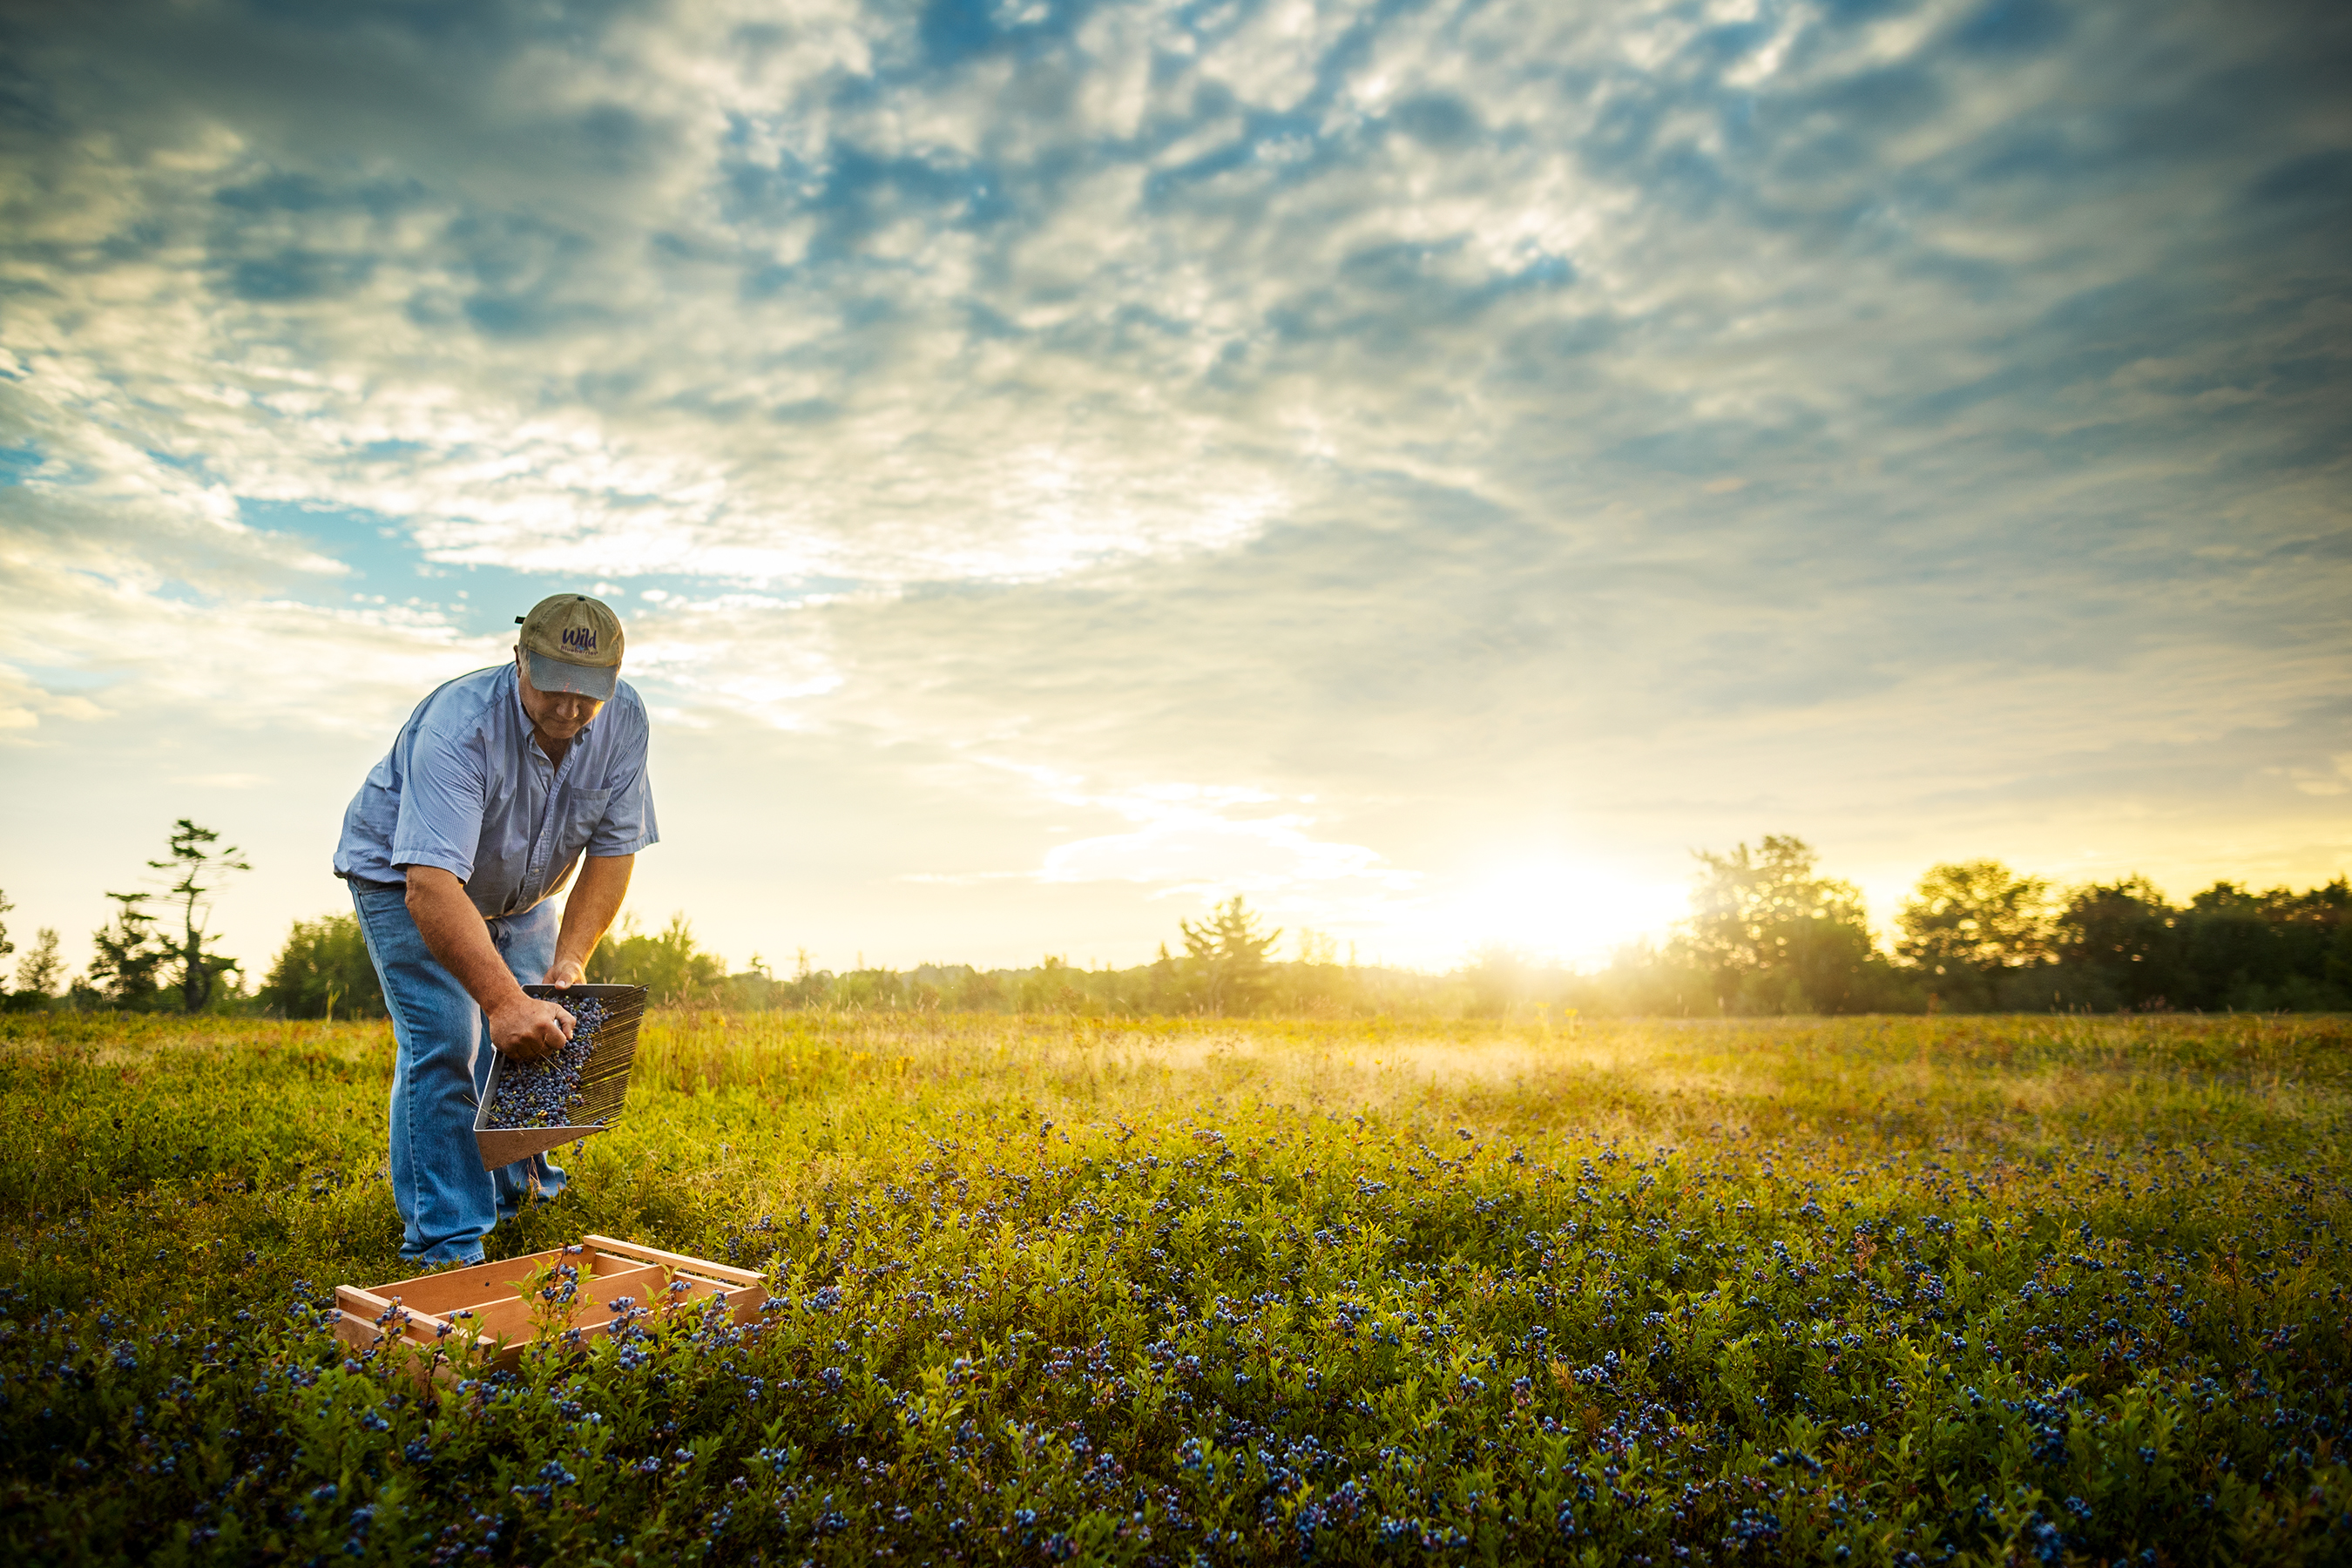 dwp_emhs_blueberry_harvest_080318_COMP01_AND_A